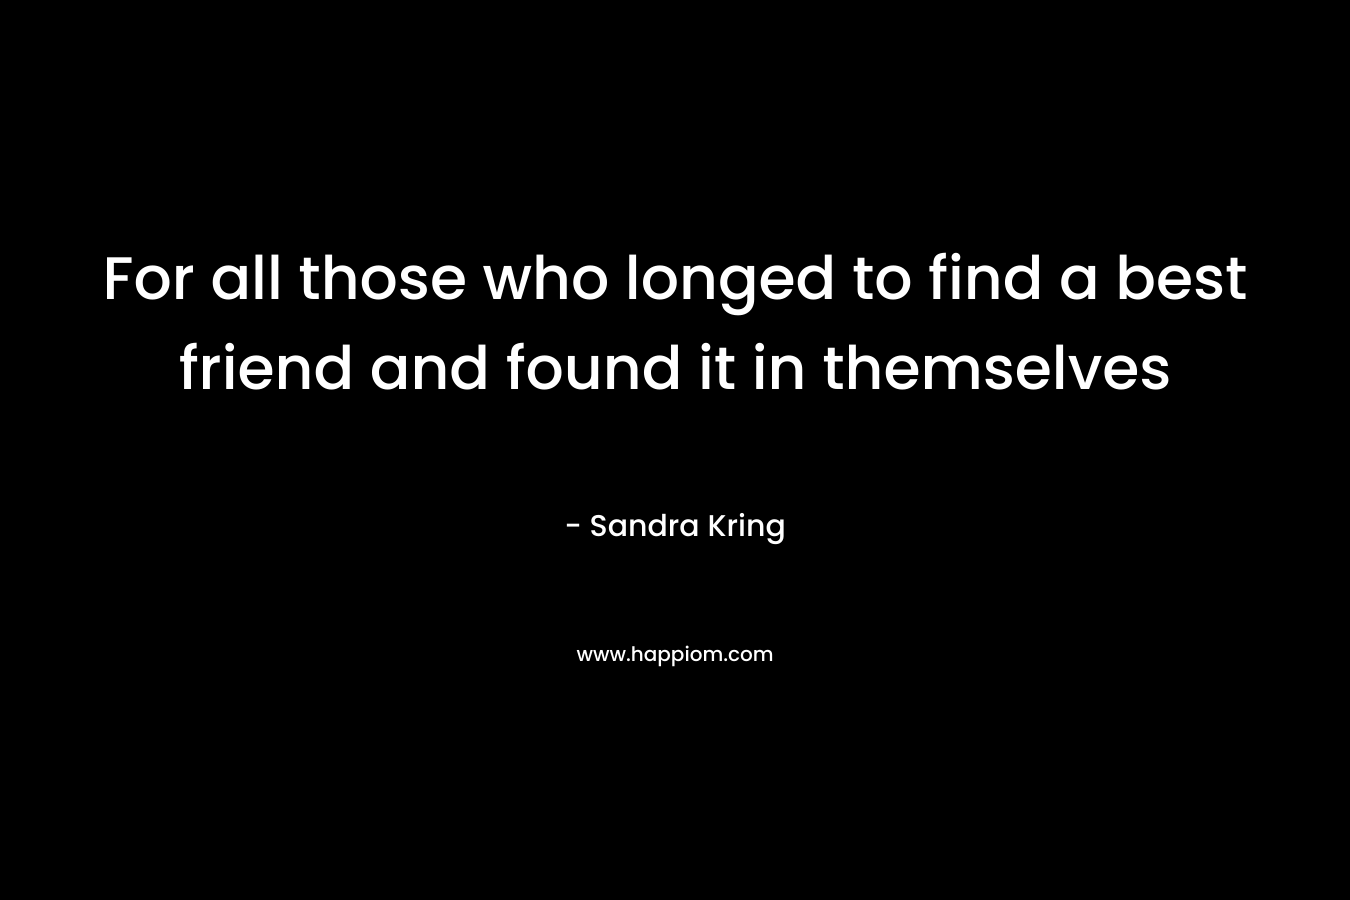 For all those who longed to find a best friend and found it in themselves – Sandra Kring